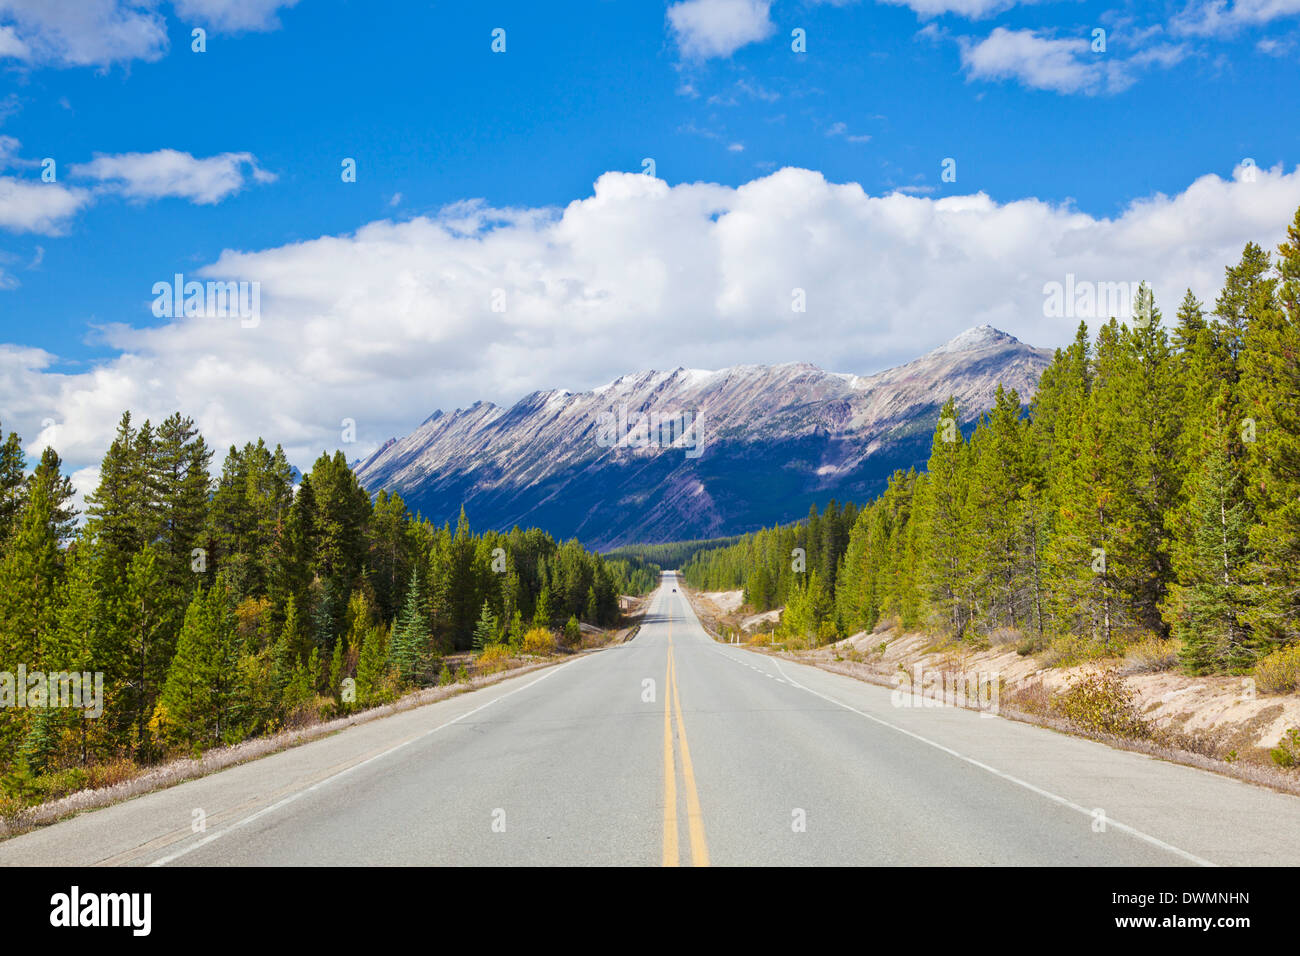 The Icefields Parkway road highway through Jasper National Park, UNESCO World Heritage Site, Alberta, Canadian Rockies, Canada Stock Photo